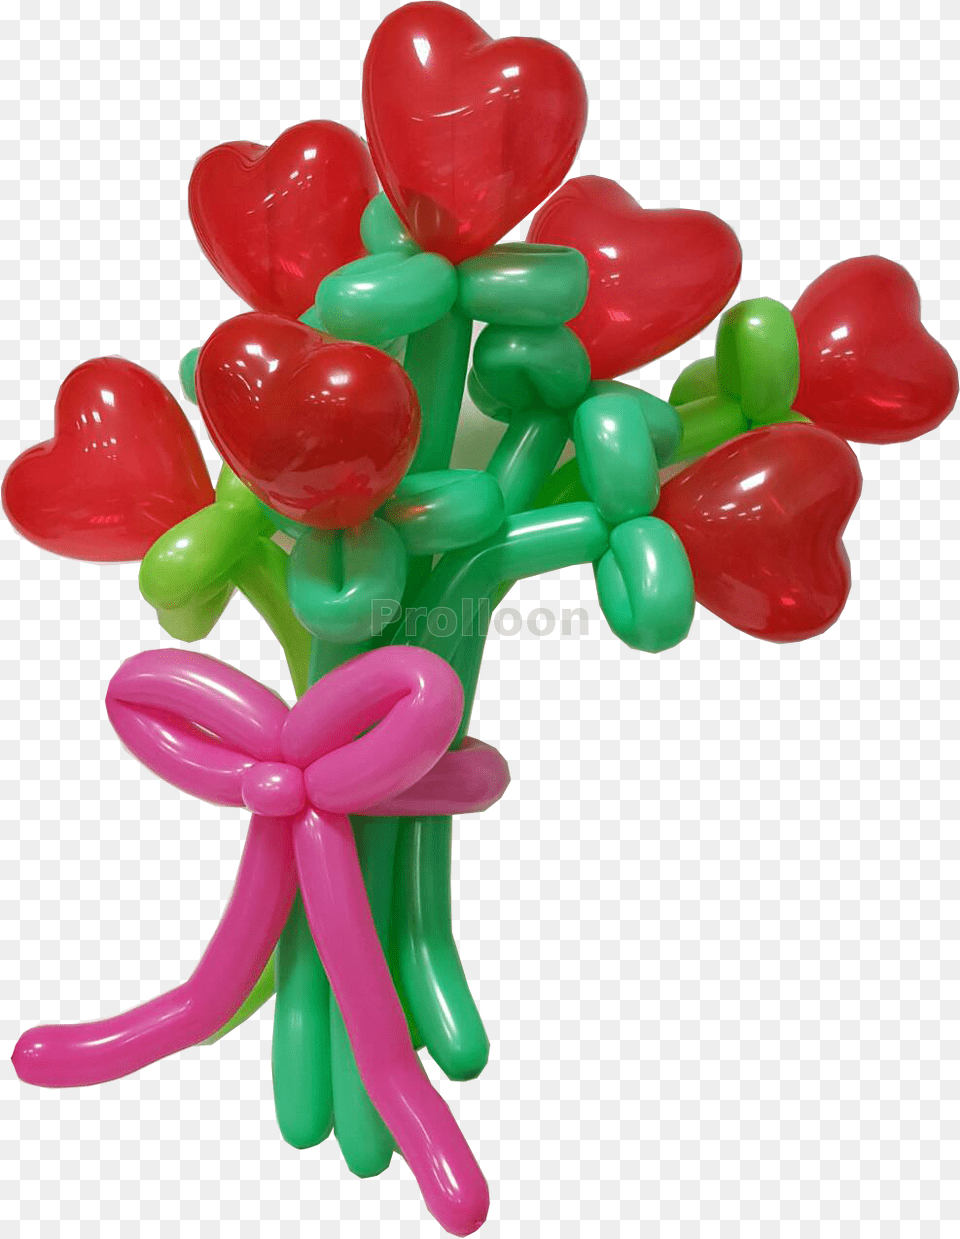 Balloon Diy Fun Party Decoration, Food, Sweets Png Image